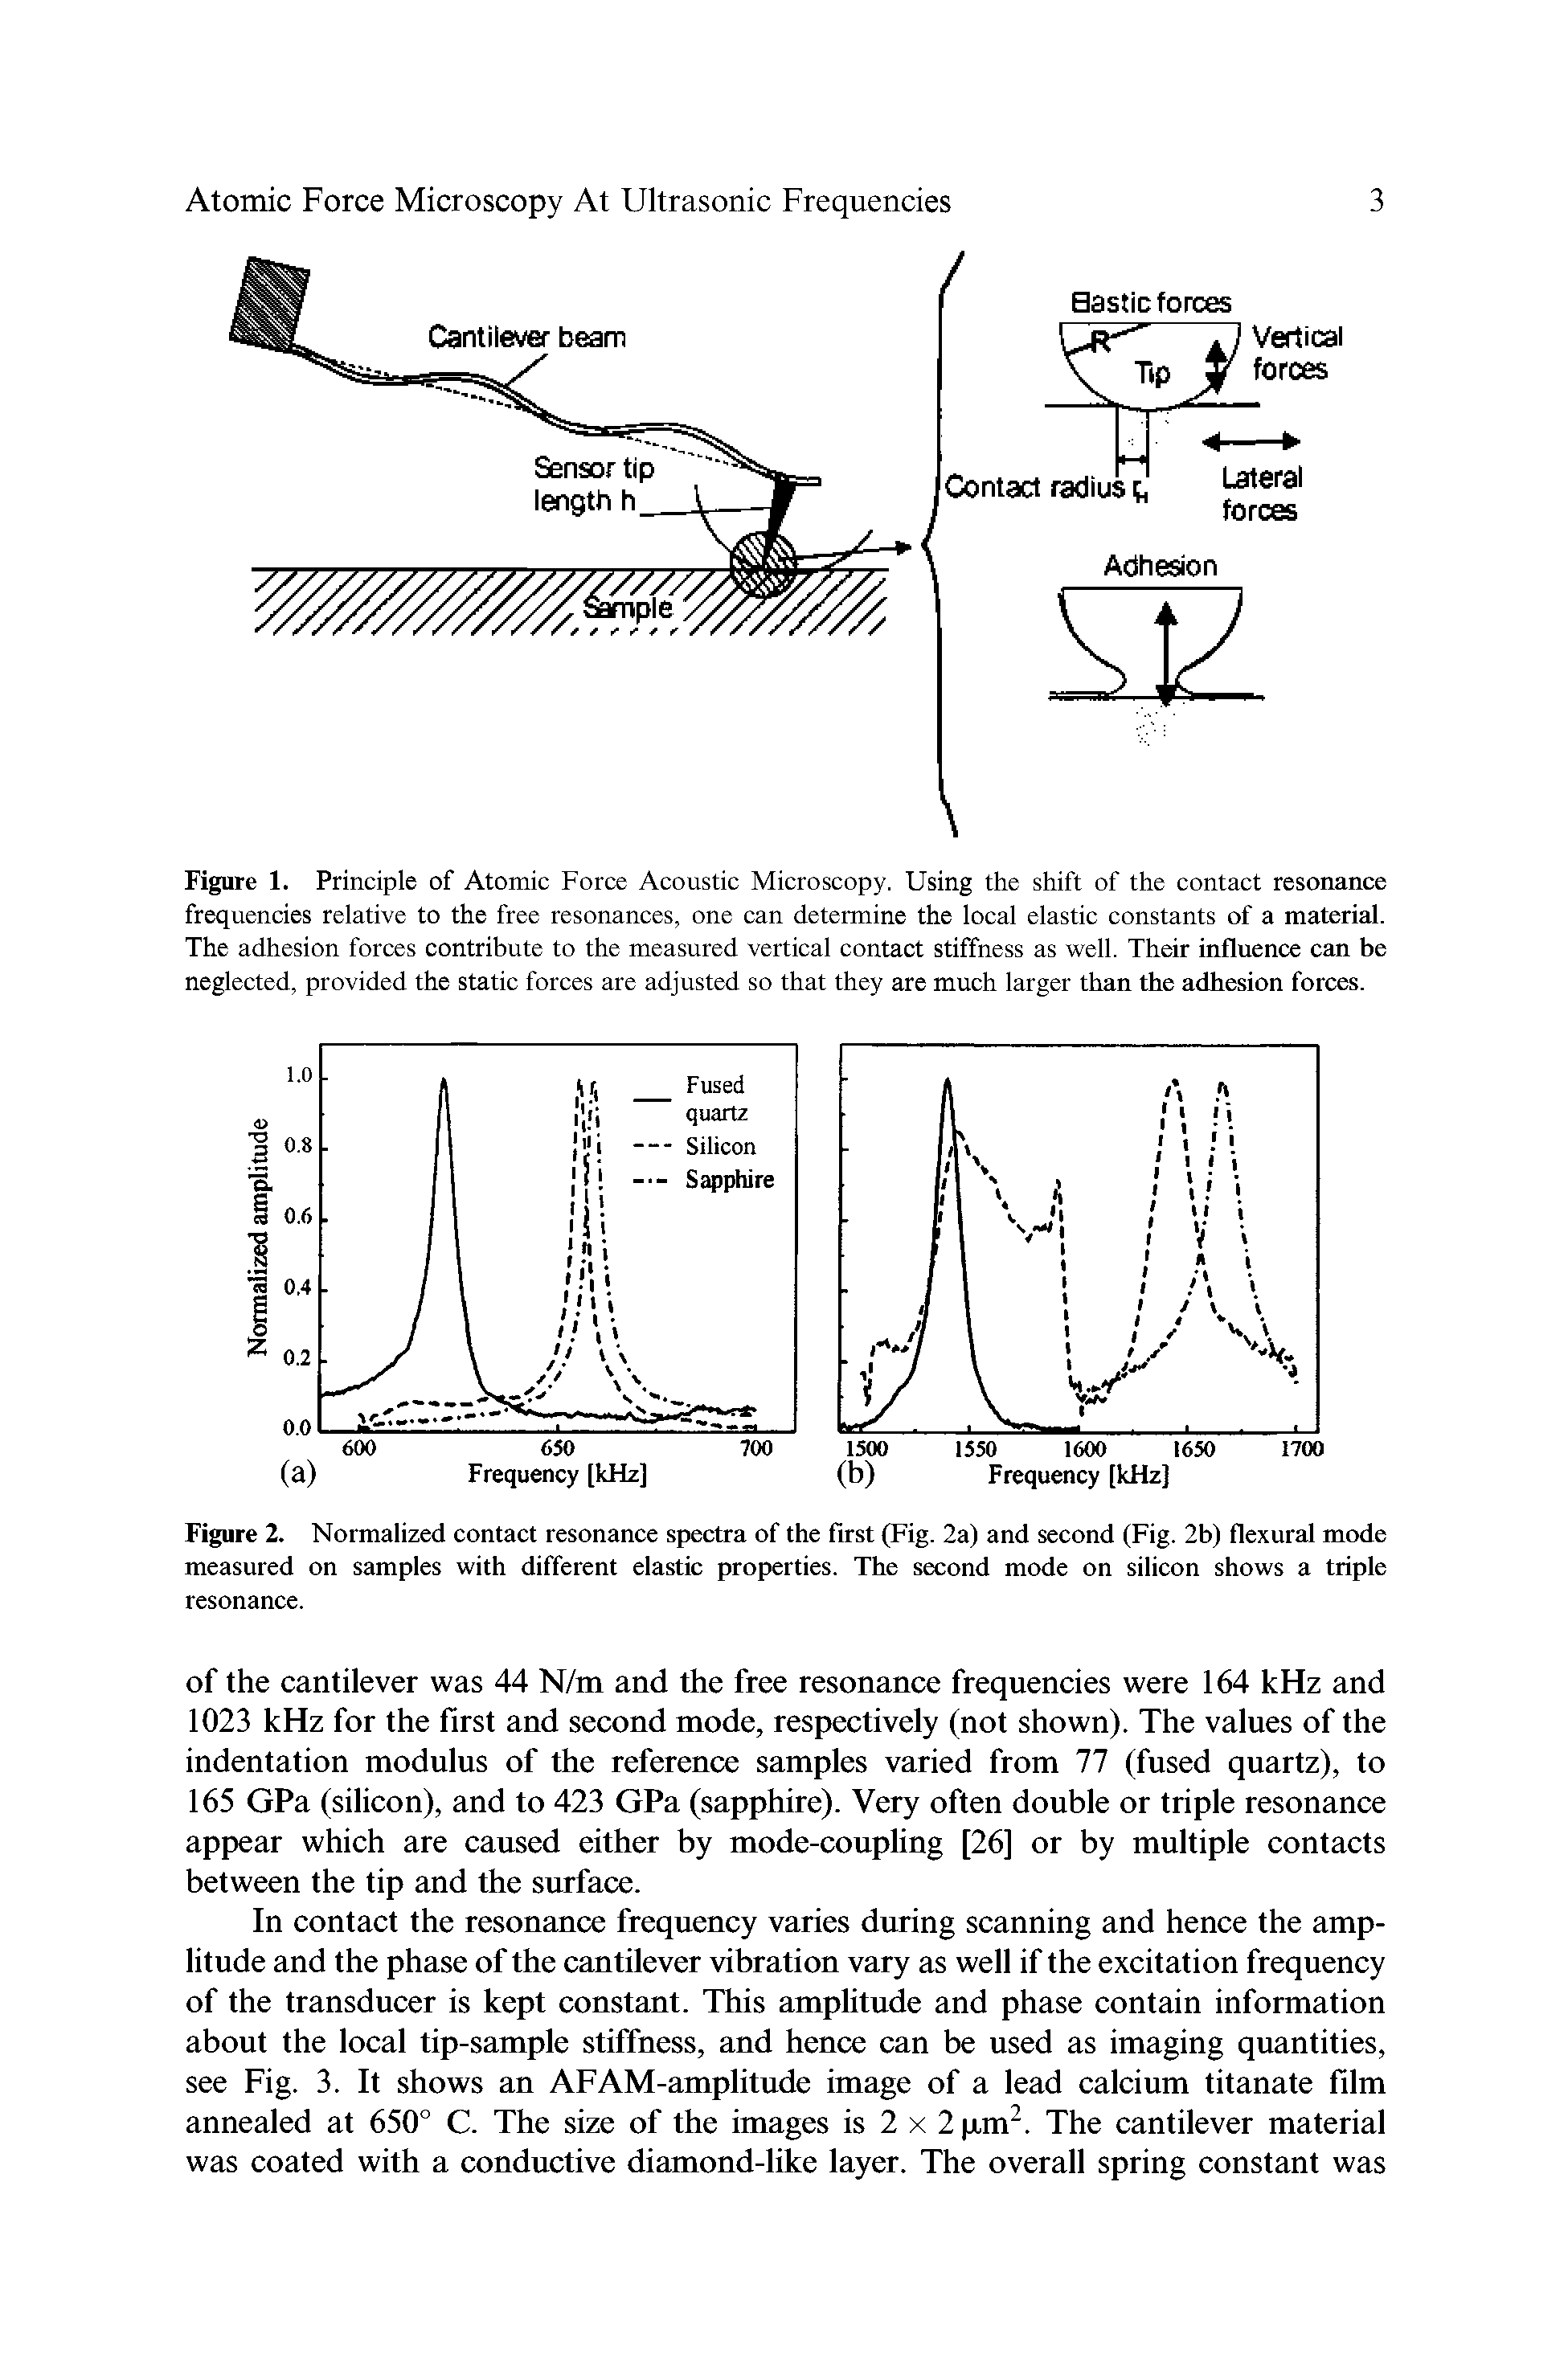 Figure 1. Principle of Atomic Force Acoustic Microscopy. Using the shift of the contact resonance frequencies relative to the free resonances, one can determine the local elastic constants of a material. The adhesion forces contribute to the measured vertical contact stiffness as well. Their influence can be neglected, provided the static forces are adjusted so that they are much larger than the adhesion forces.